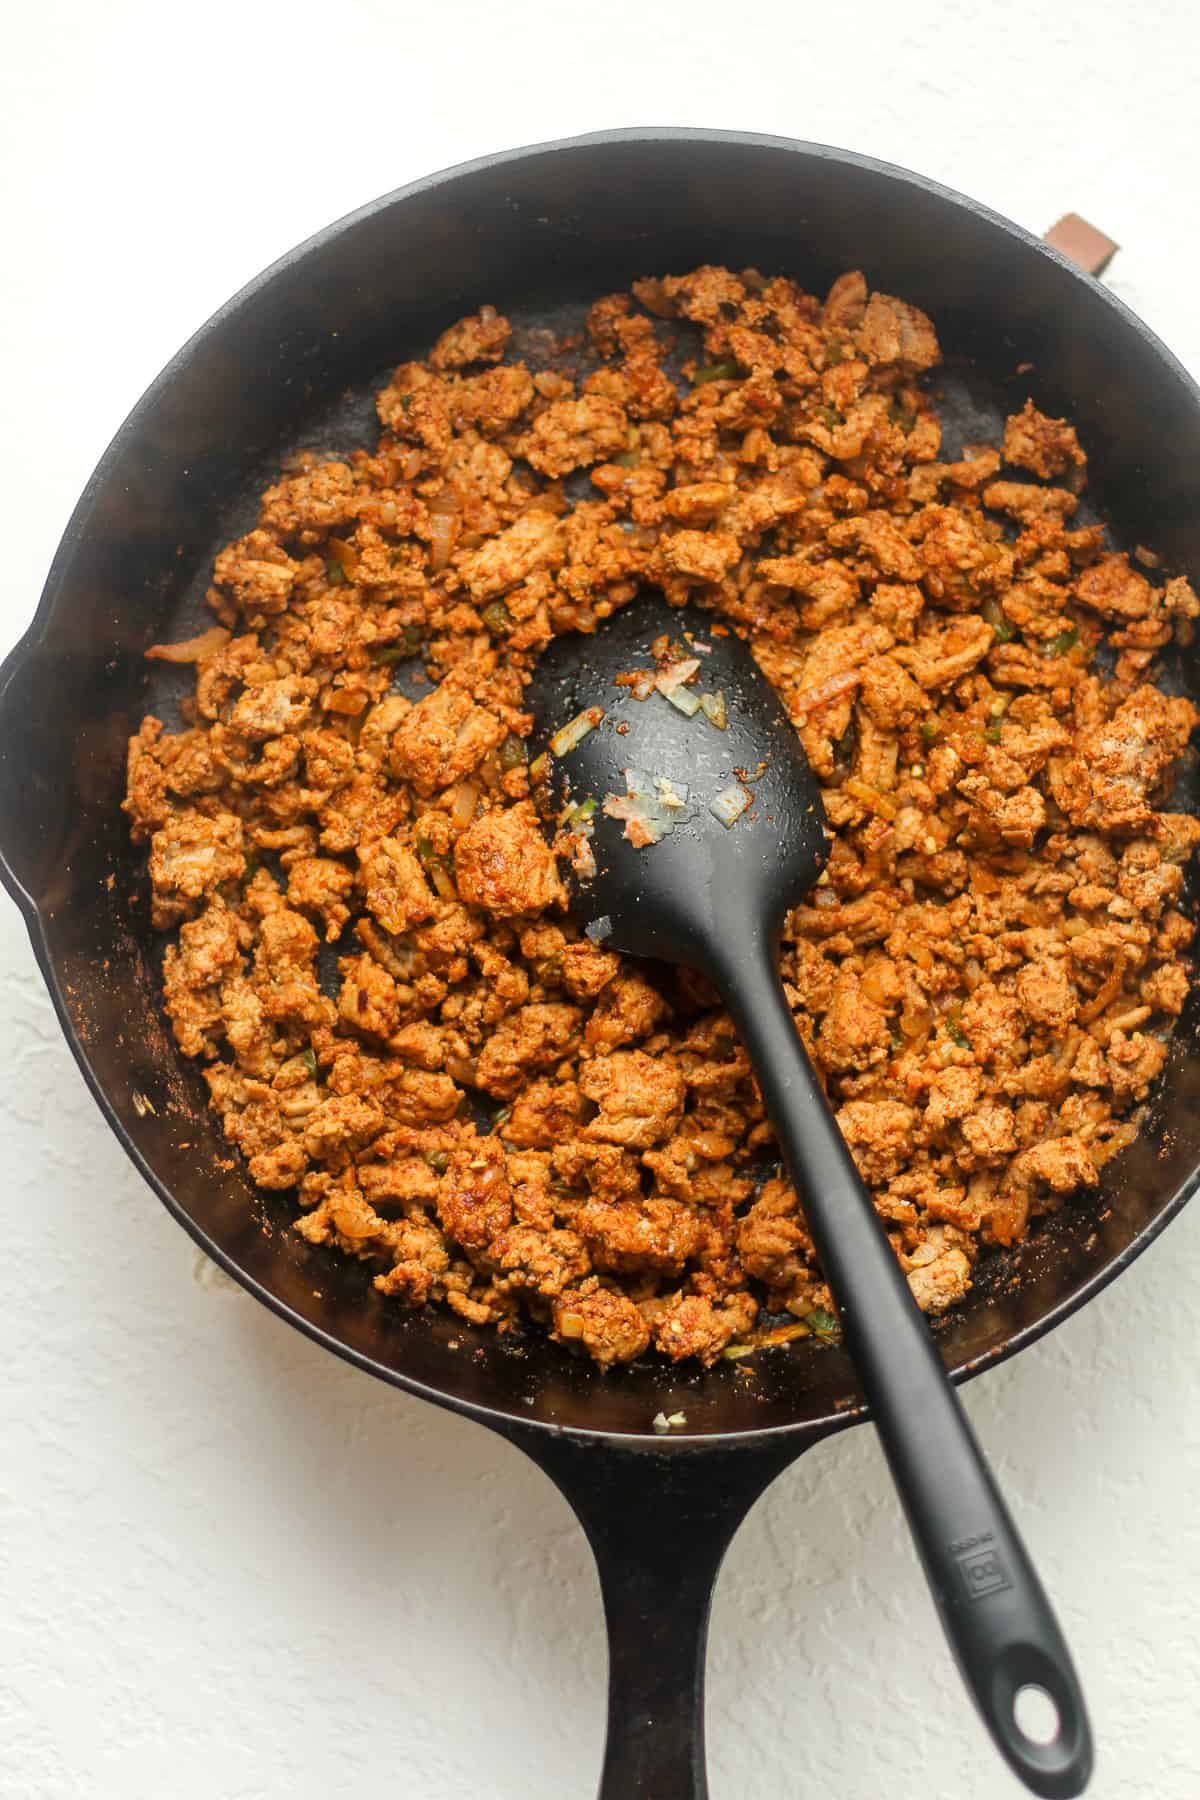 A skillet of the cooked ground turkey with taco seasoning.